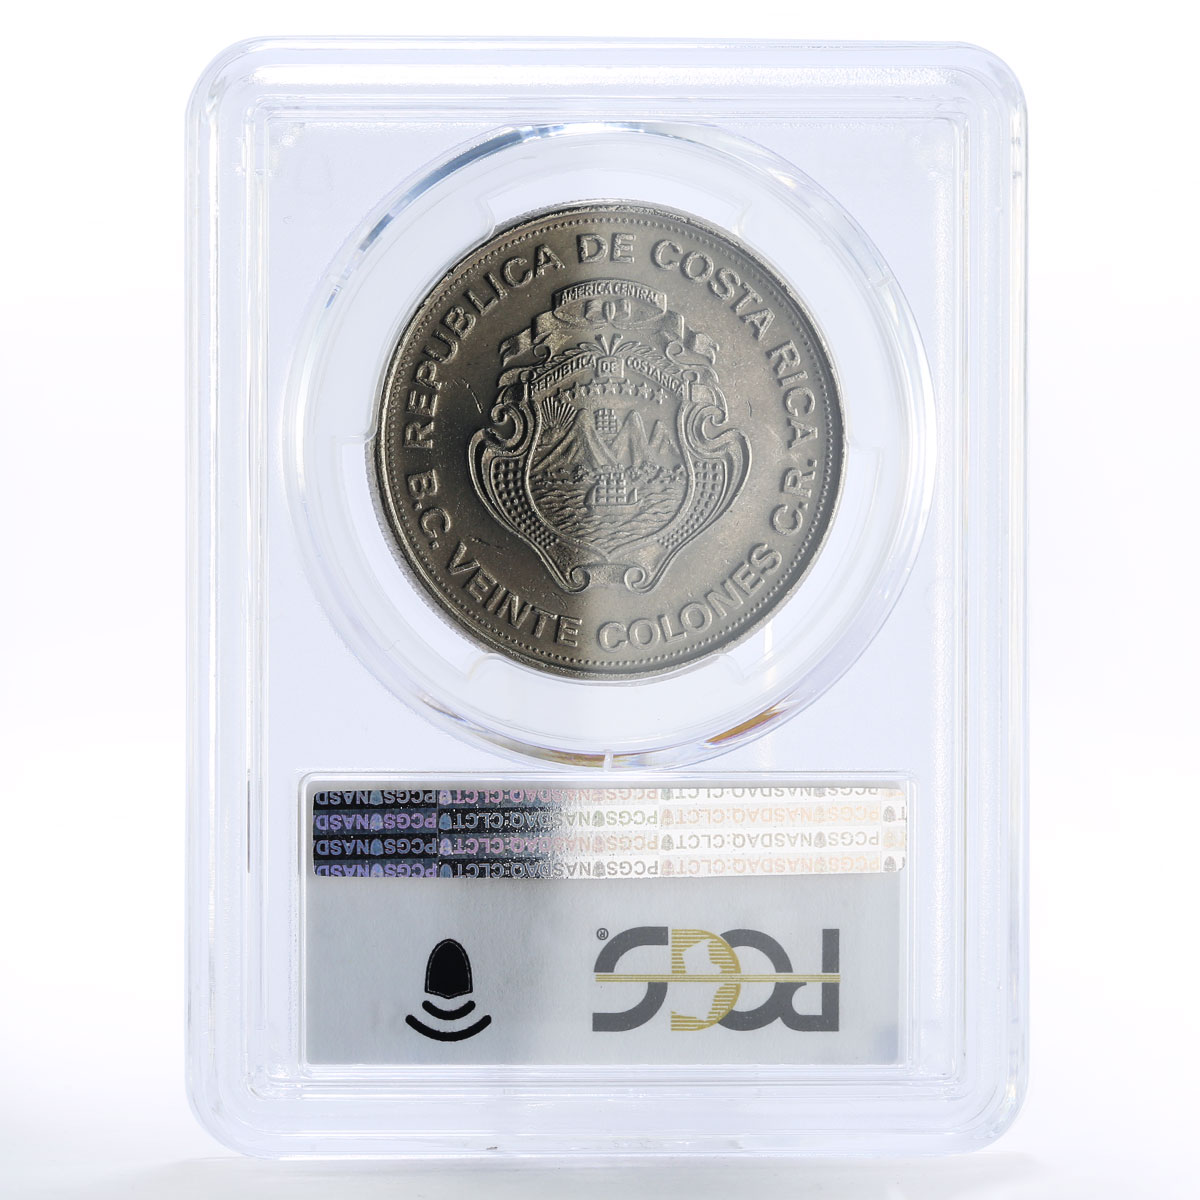 Costa Rica 20 colones 25 Years of Central Bank MS65 PCGS nickel coin 1975